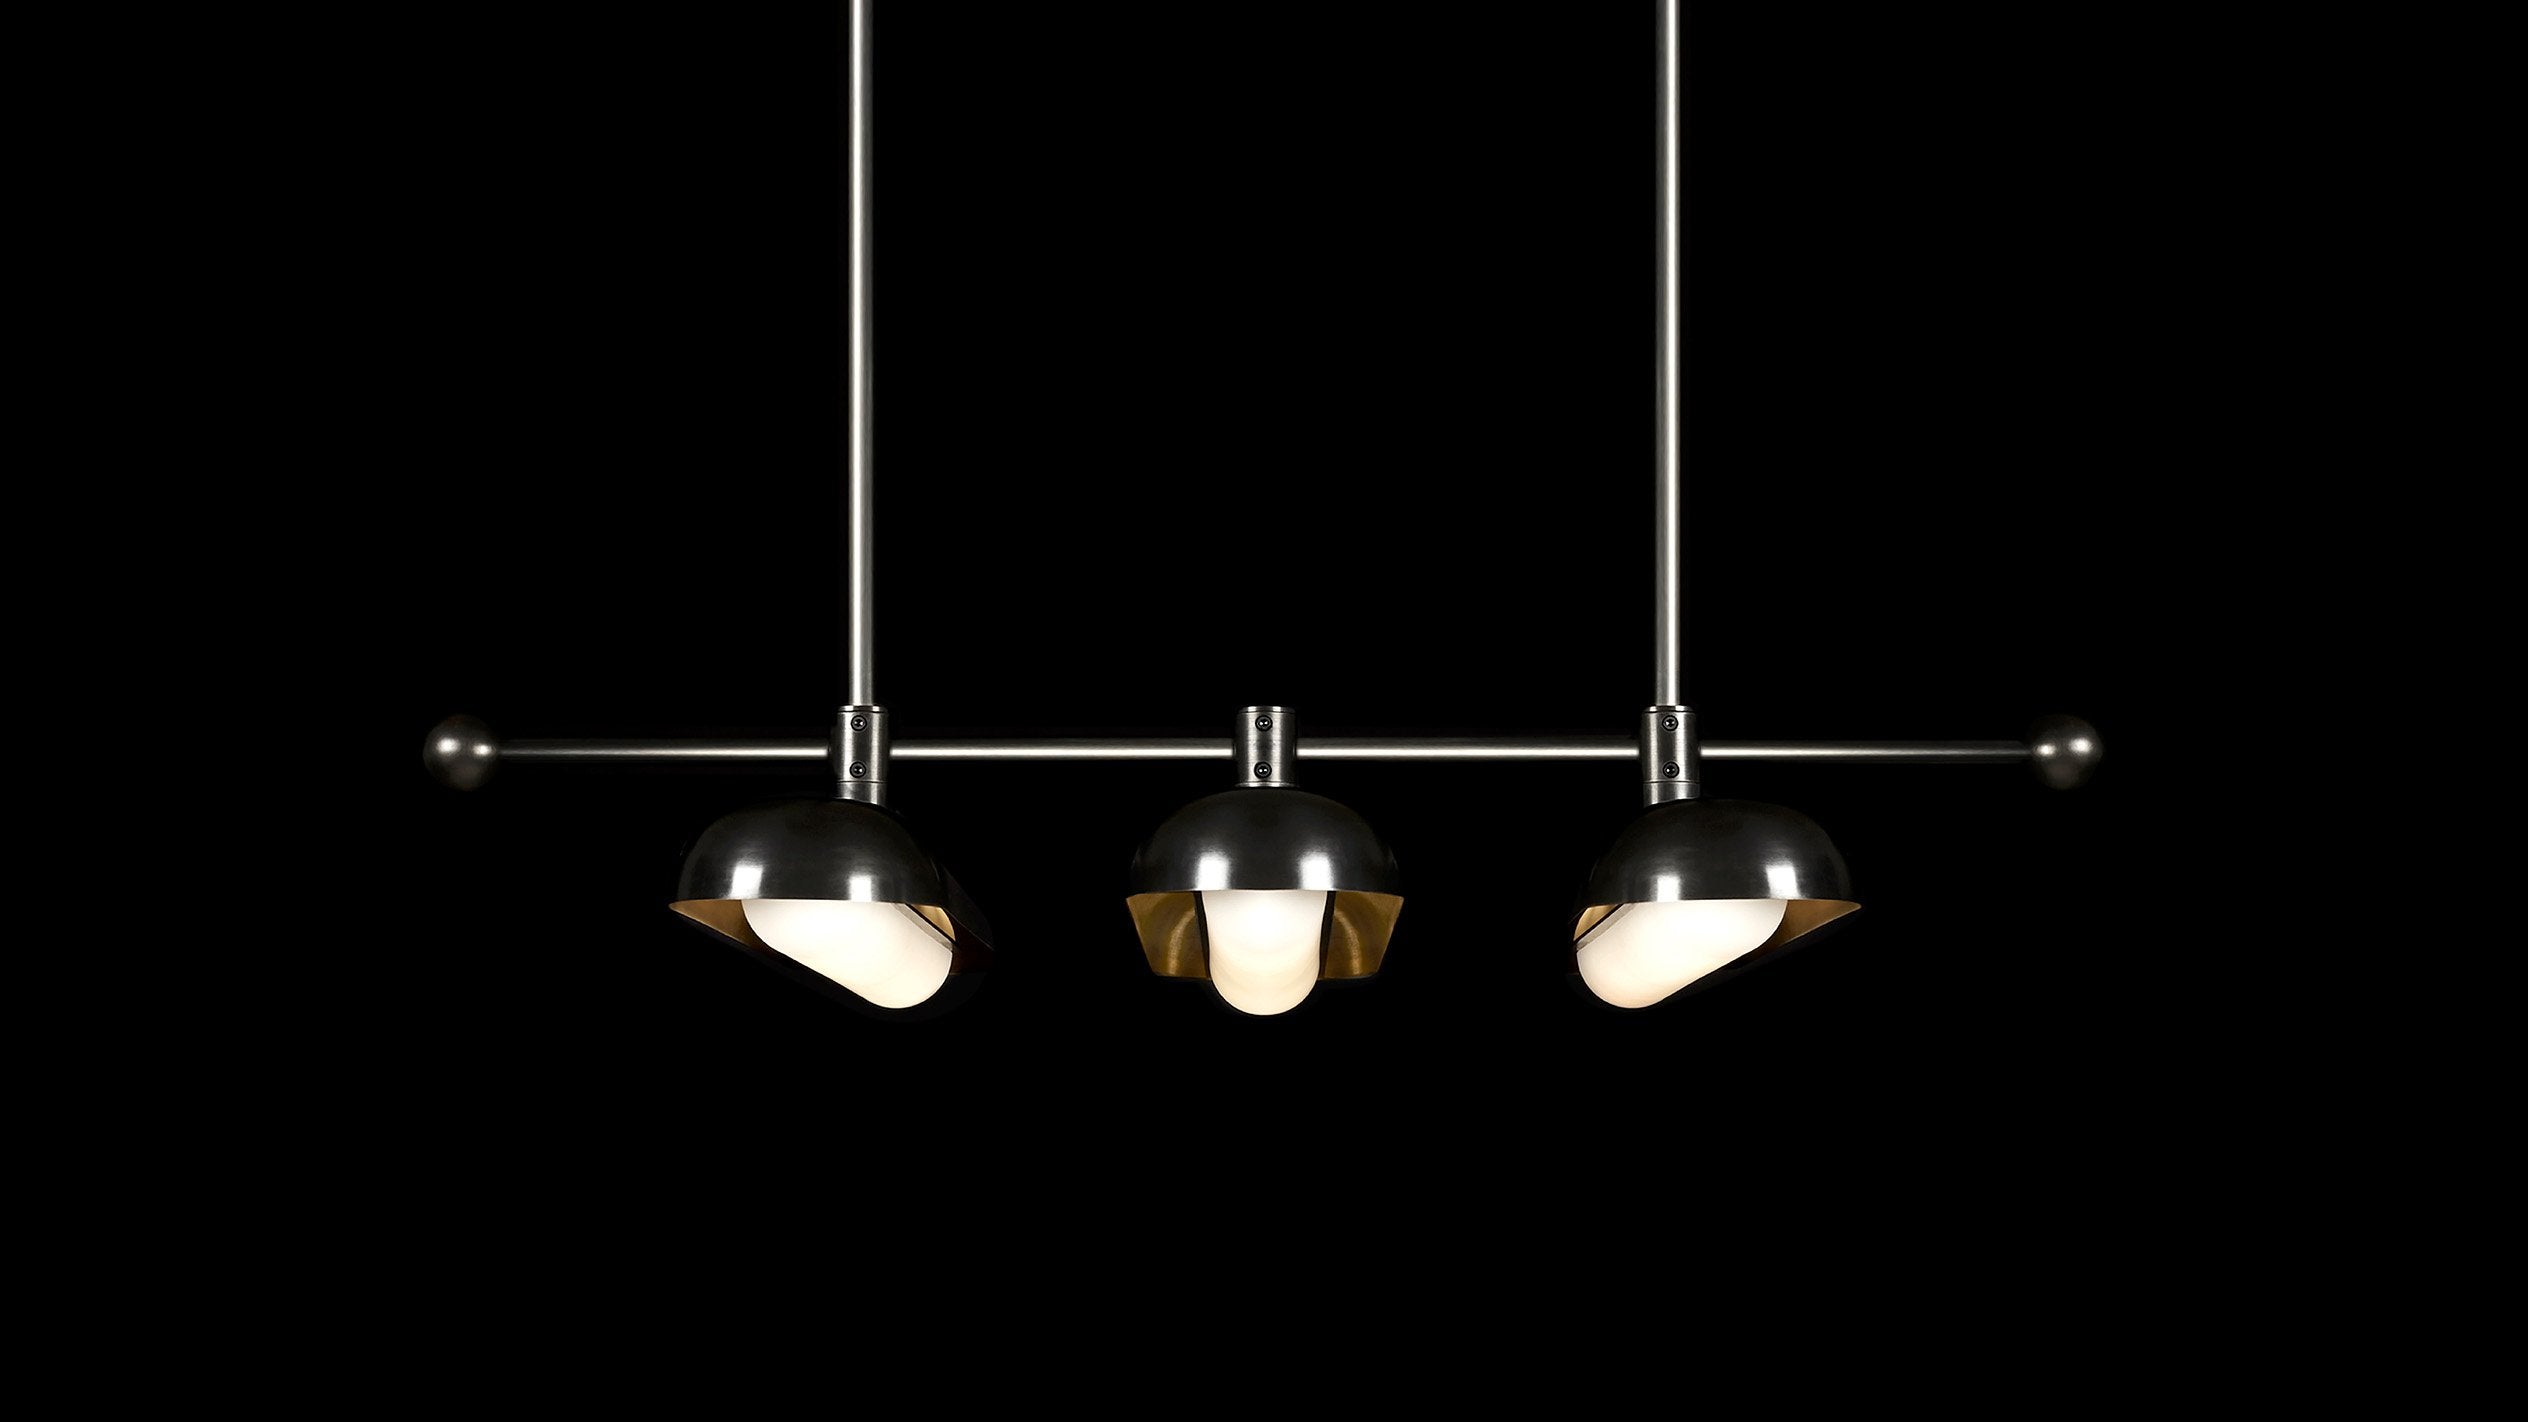 CIRCUIT : 3 ceiling pendant in a two-tone Blackened Brass / Aged Brass finish, hanging against a black background.